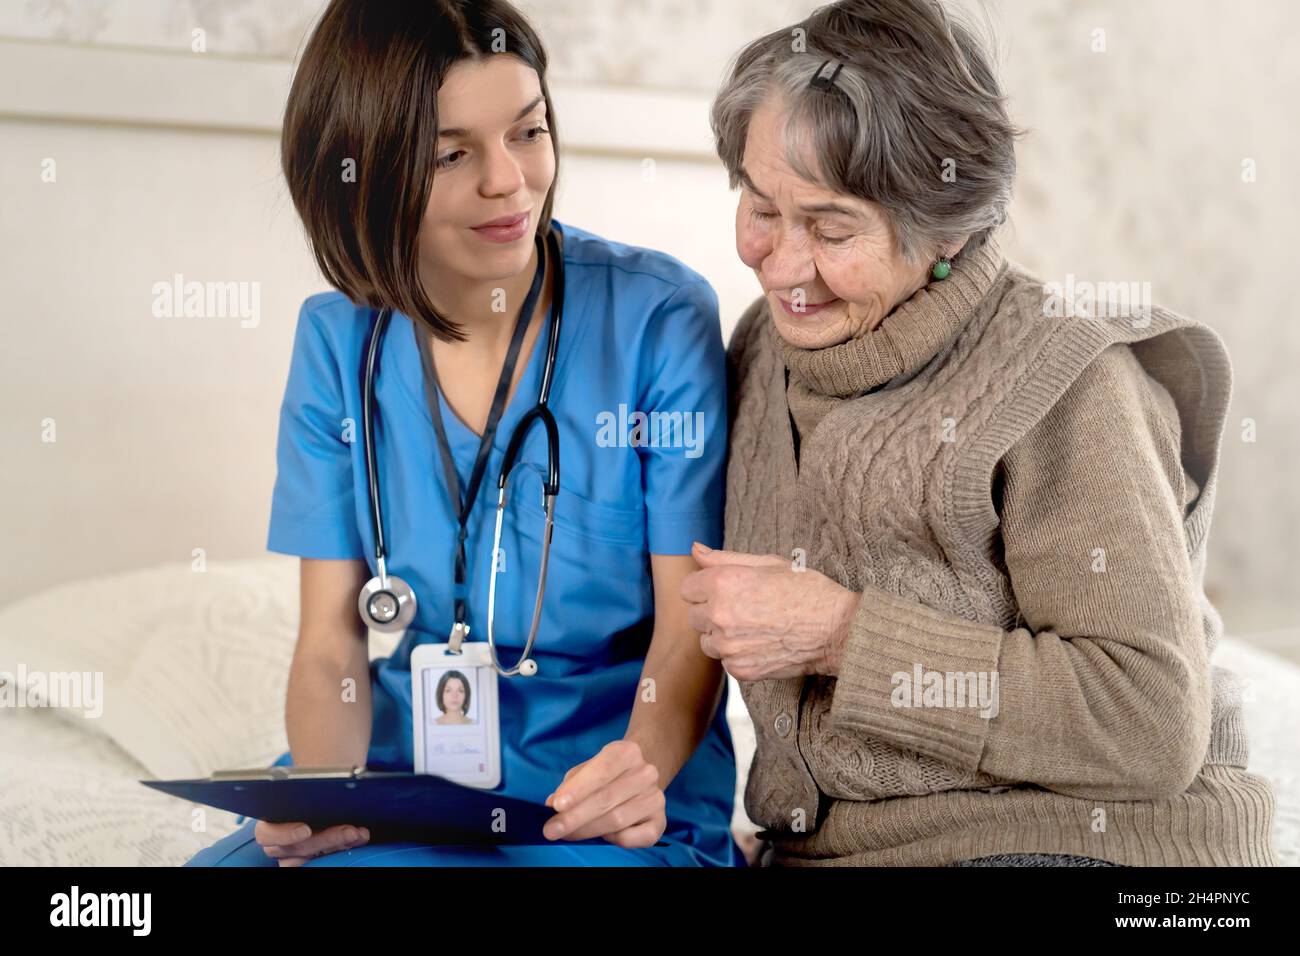 Young nurse is caring for an elderly 80-year-old woman at home,  Stock Photo